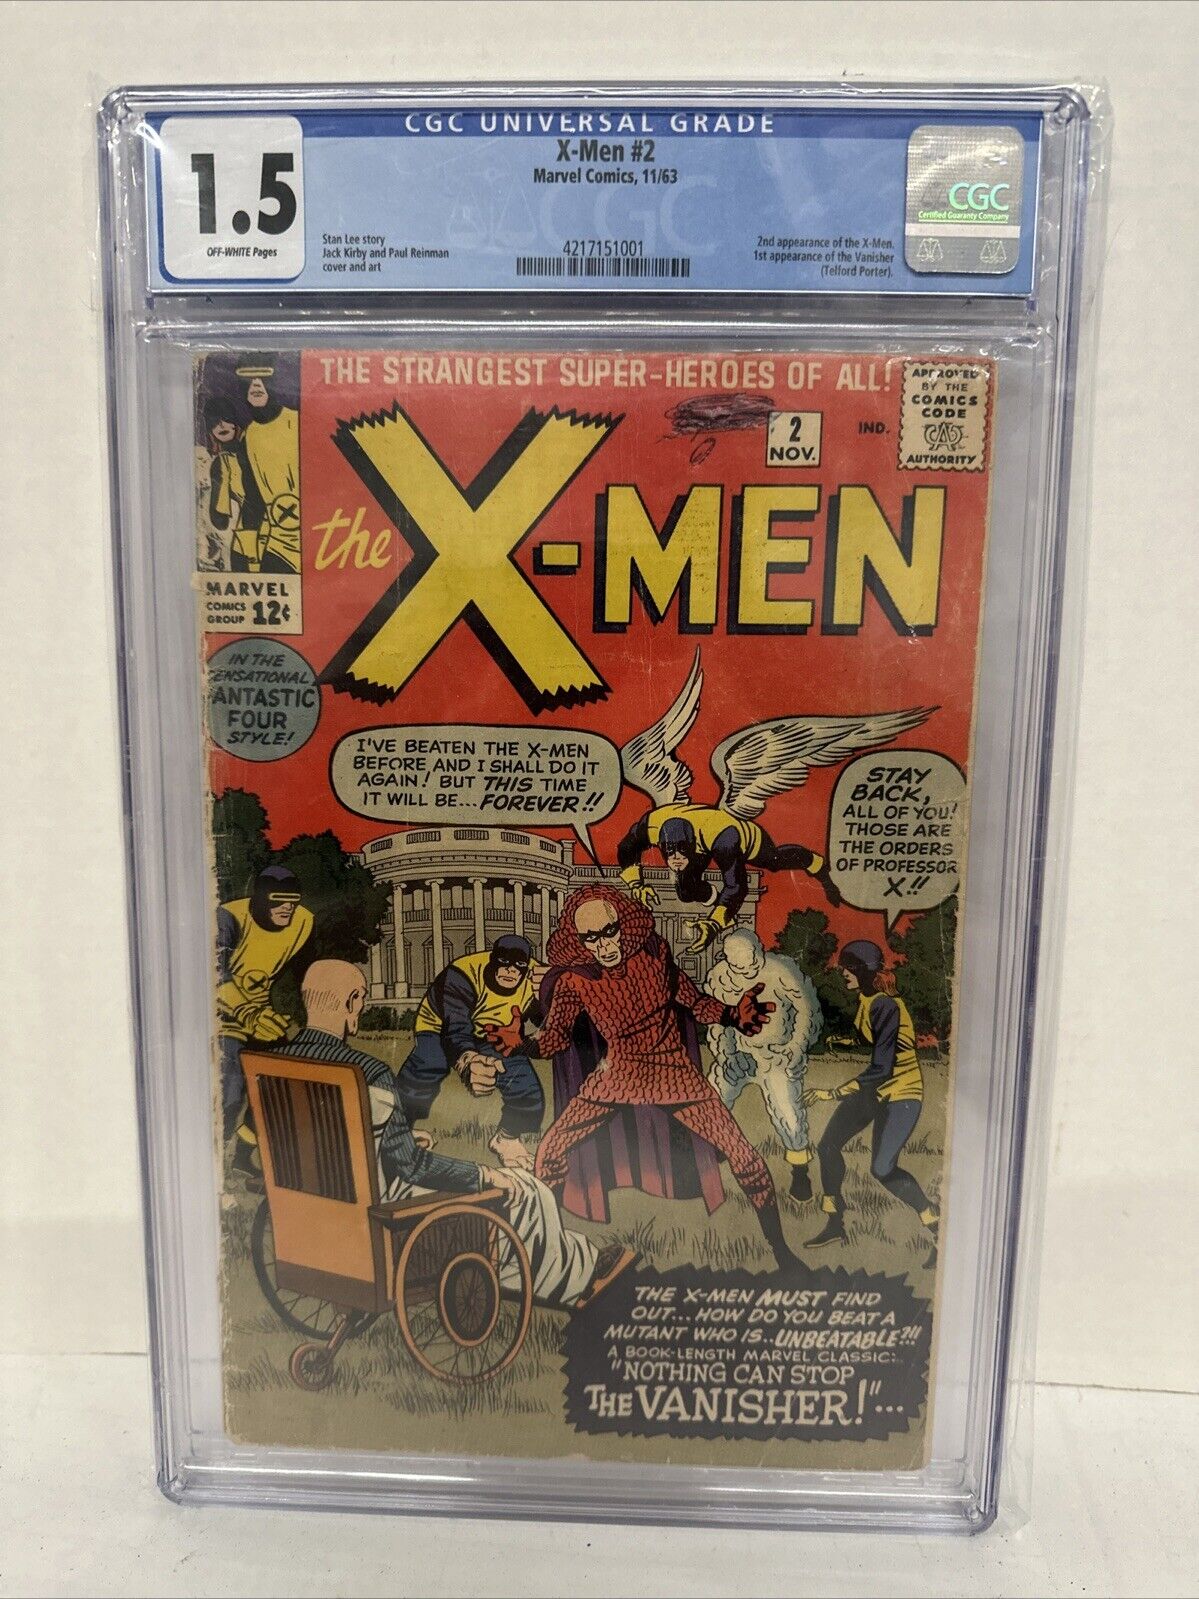 X-MEN #2 CGC 1.5 2ND APPEARANCE X-MEN MARVEL 1963 Off White Pages Stan Lee Kirby